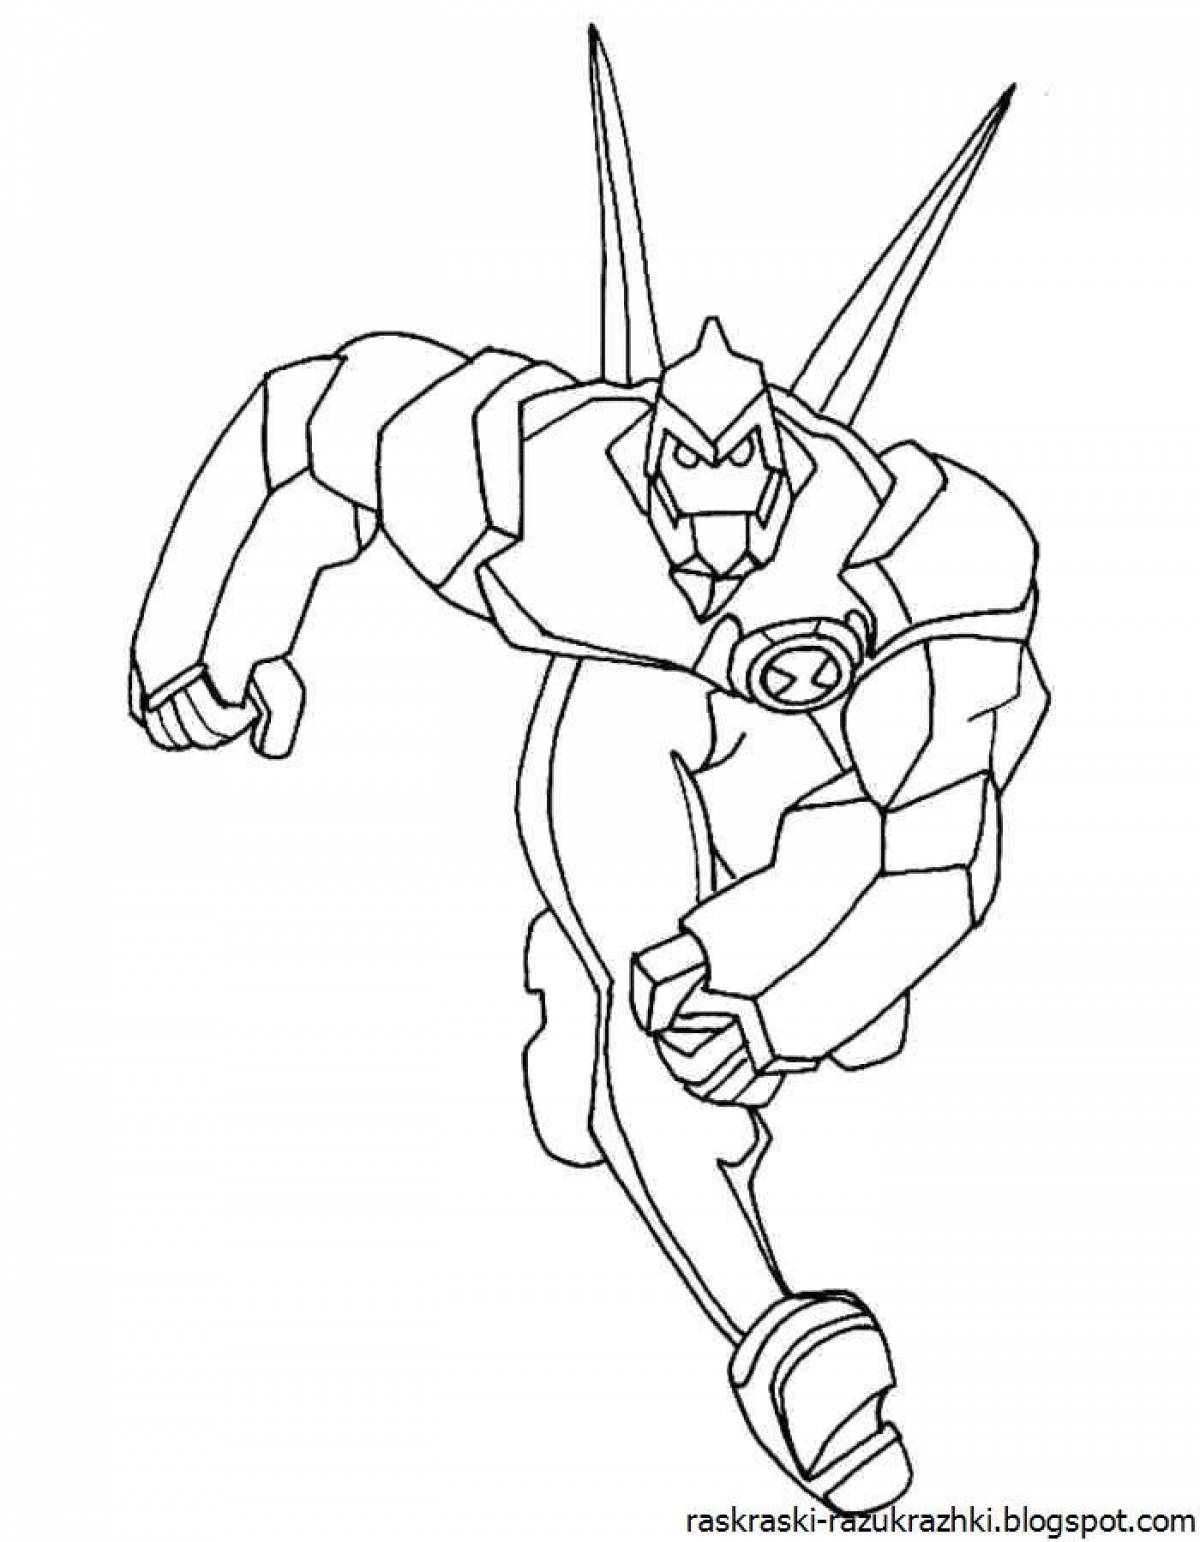 Showy brawl star coloring page